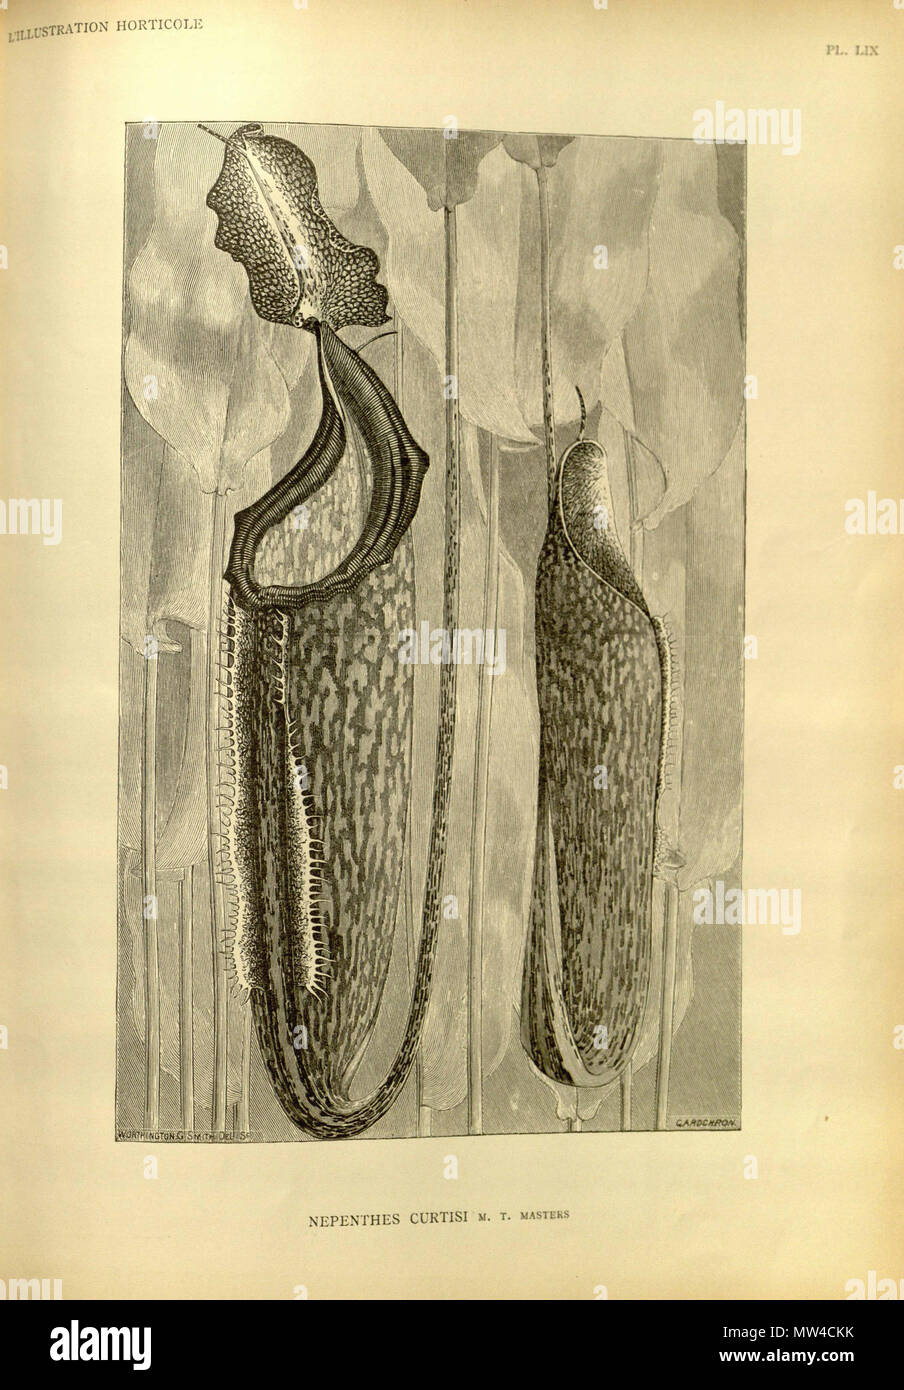 440 Nepenthes curtisii -'Illustration horticole (1888) Foto Stock